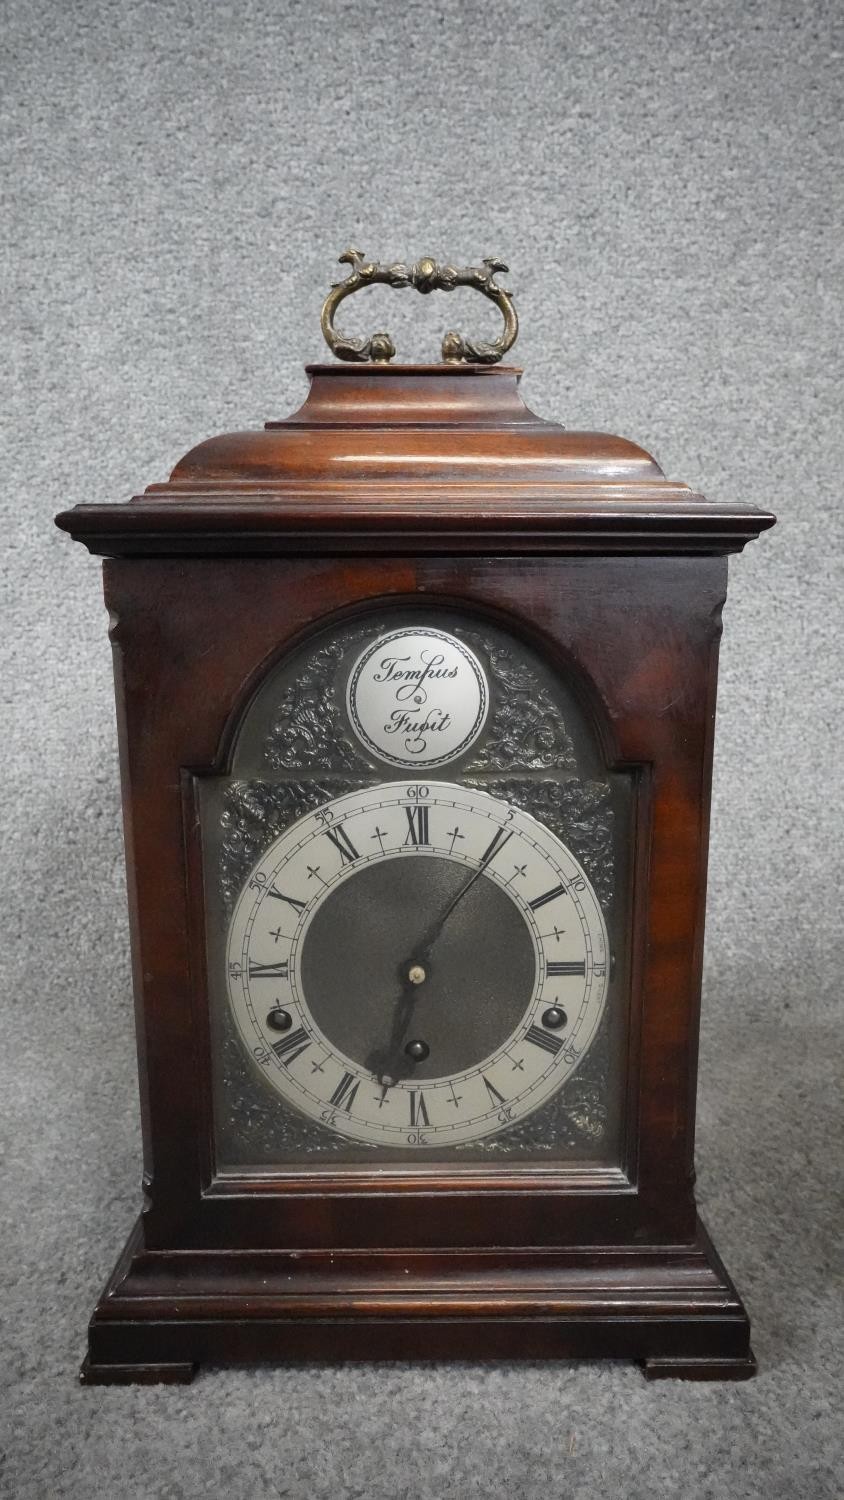 A modern 18th century style bracket clock, the dial inscribed 'Tempus Fugit', with Roman numerals